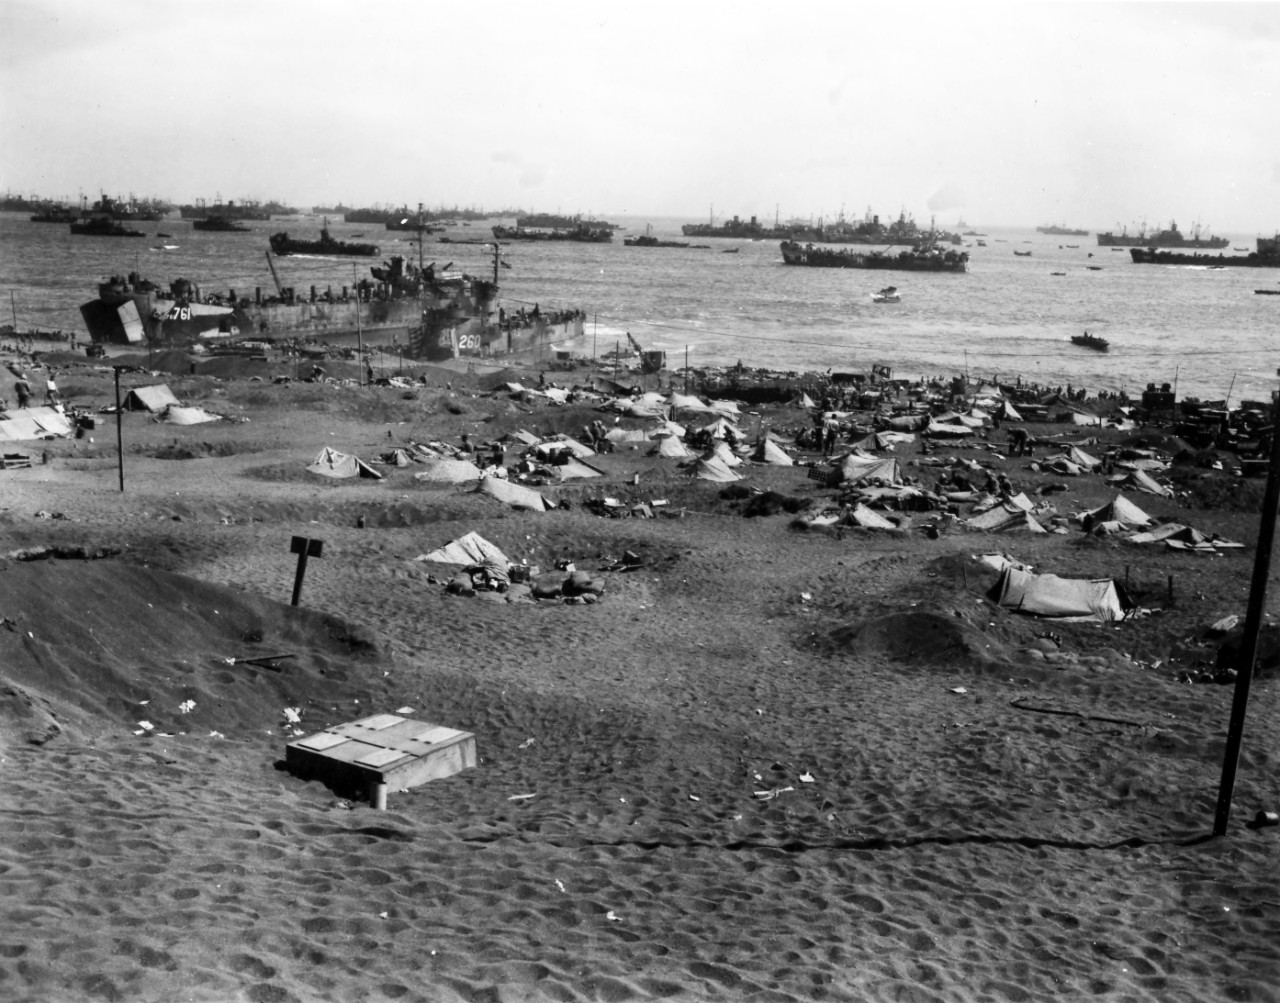 <p>Marines camp on Yellow Beach 1 on the southeastern coast of Iwo Jima on 27 February 1945. In the distance, the U.S. Coast Guard–manned <a href="https://www.history.navy.mil/content/history/nhhc/research/histories/ship-histories/danfs/l/lst-761.html"><i>LST-761</i></a> and the U.S. Navy–manned <i>LSM-260</i> are beached next to each other. Further out, an evacuation-control LST (identified by the painted letter H on her hull) remains offshore to examine and process casualties. Image is from the of Admiral Harry W. Hill Collection.</p>
